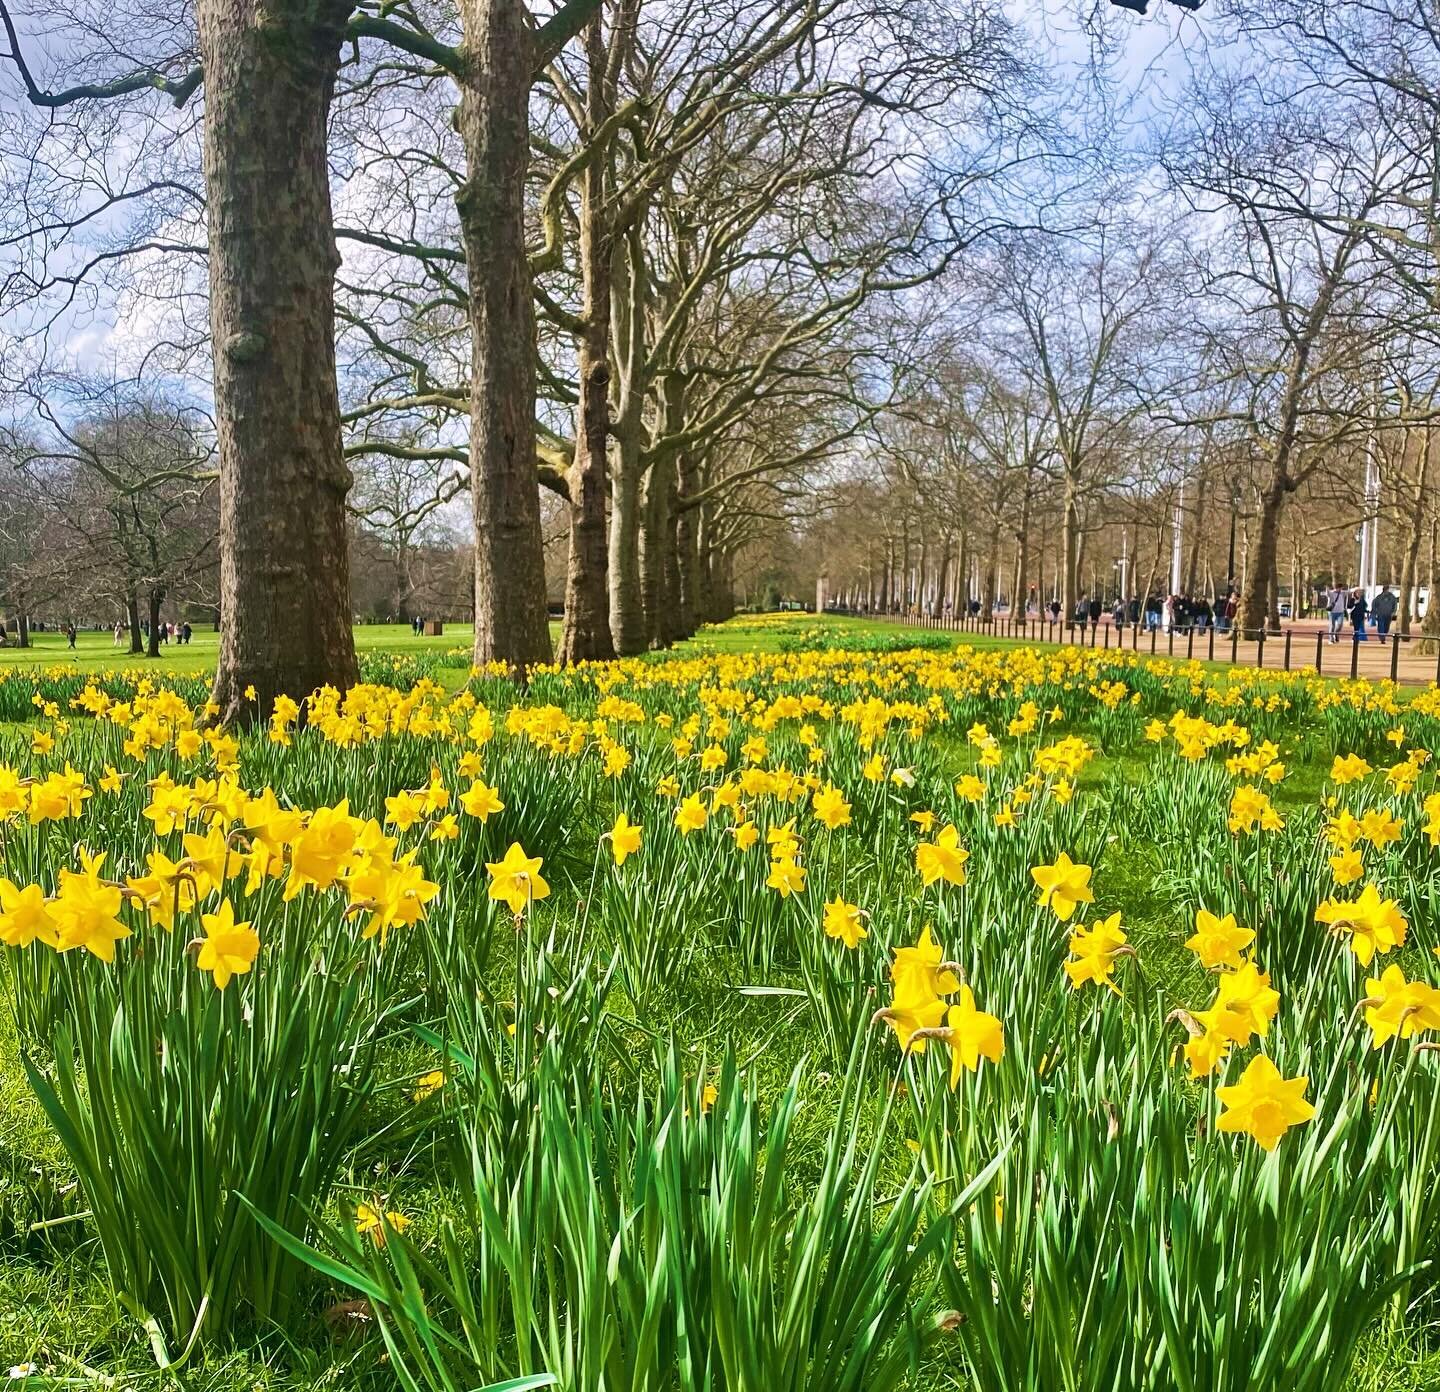 That&rsquo;s better girls x
.
.
.
#stjamespark #daffodils #coutours #london 

@karendevilliers_mysilverstreet @coutours @visitlondon